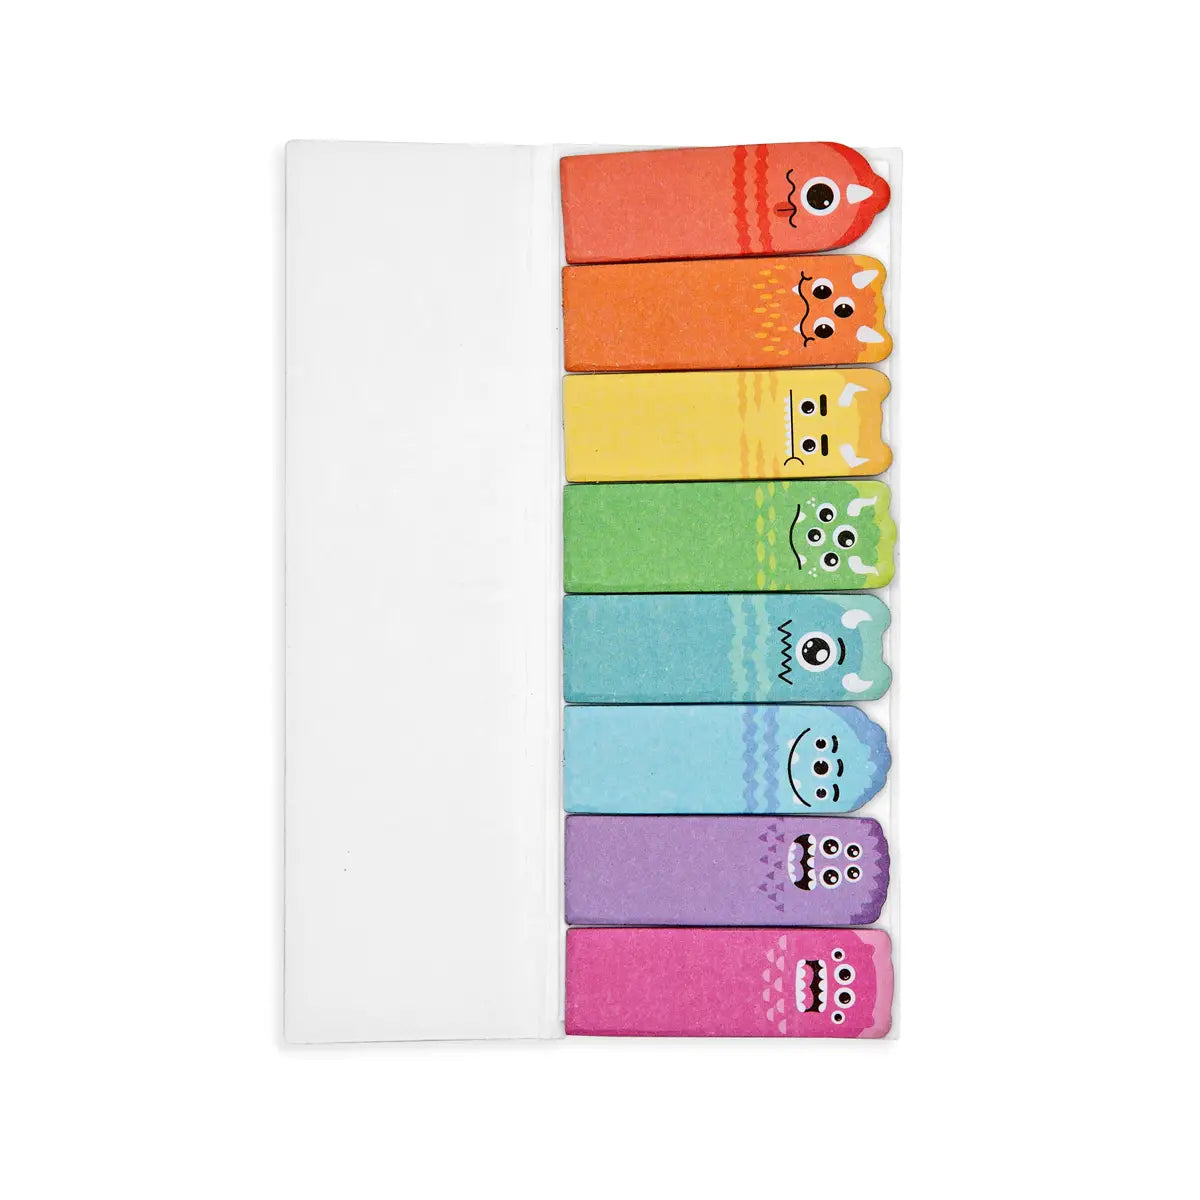 Ooly Note Pals Sticky Note Tabs - Monster Pals | Prelude & Dawn | Los Angeles